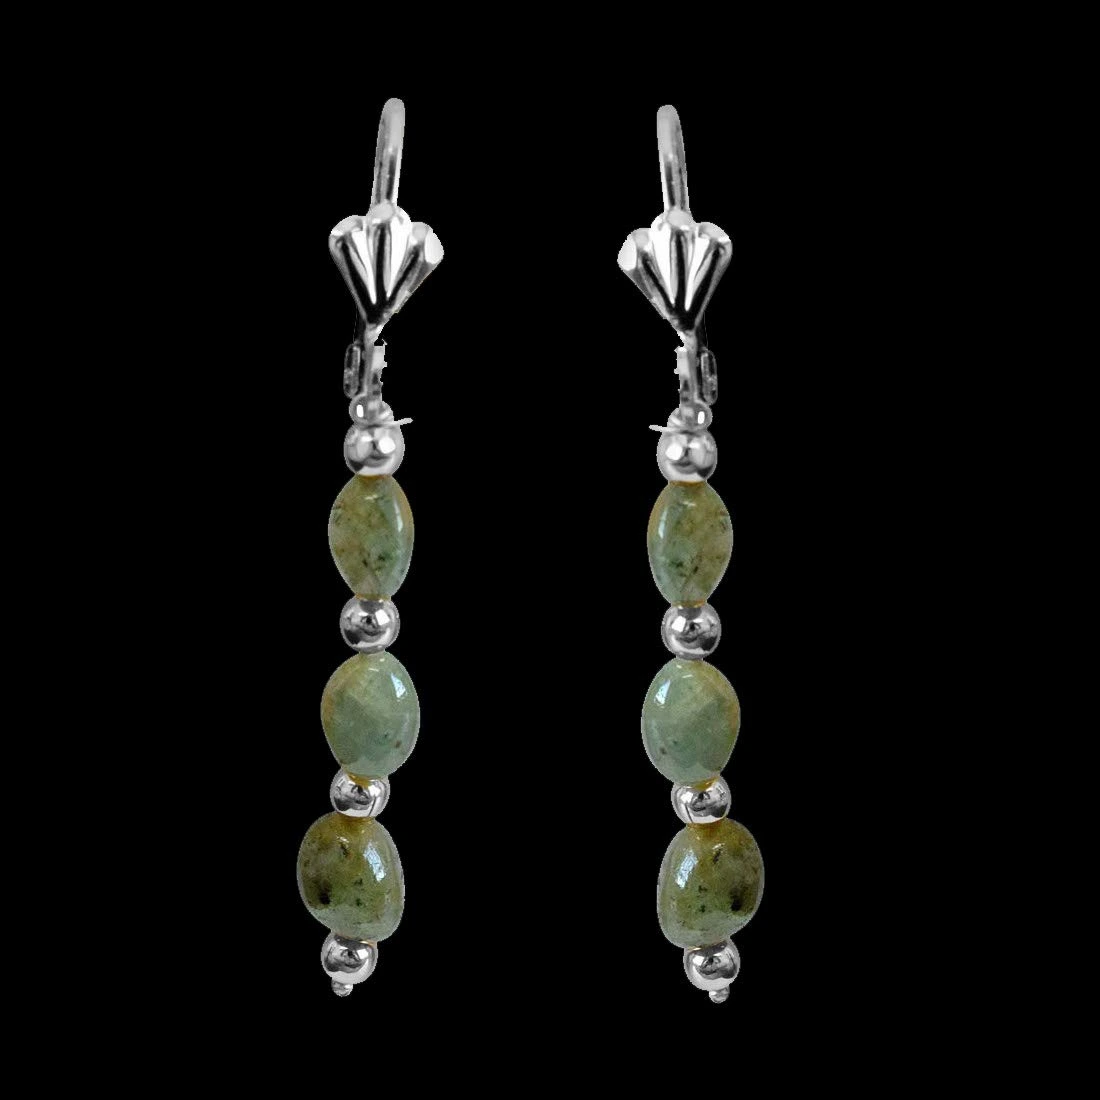 Real Natural Oval Emerald & Silver Plated Beads Earring (SE367)